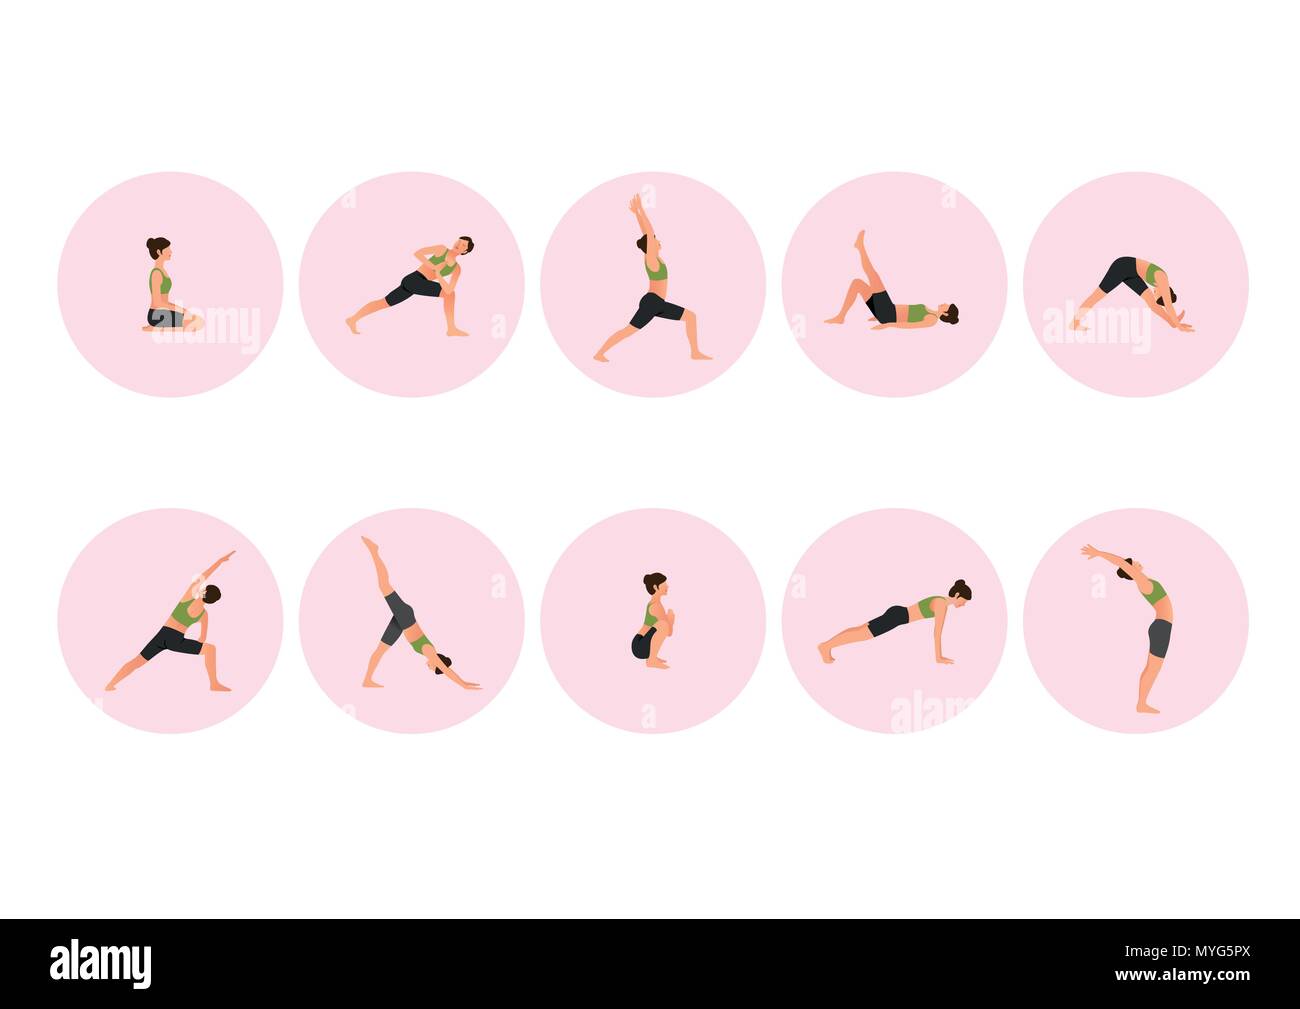 Training people icons set for sport and fitness. Flat style design vector illustration. 001 Stock Vector